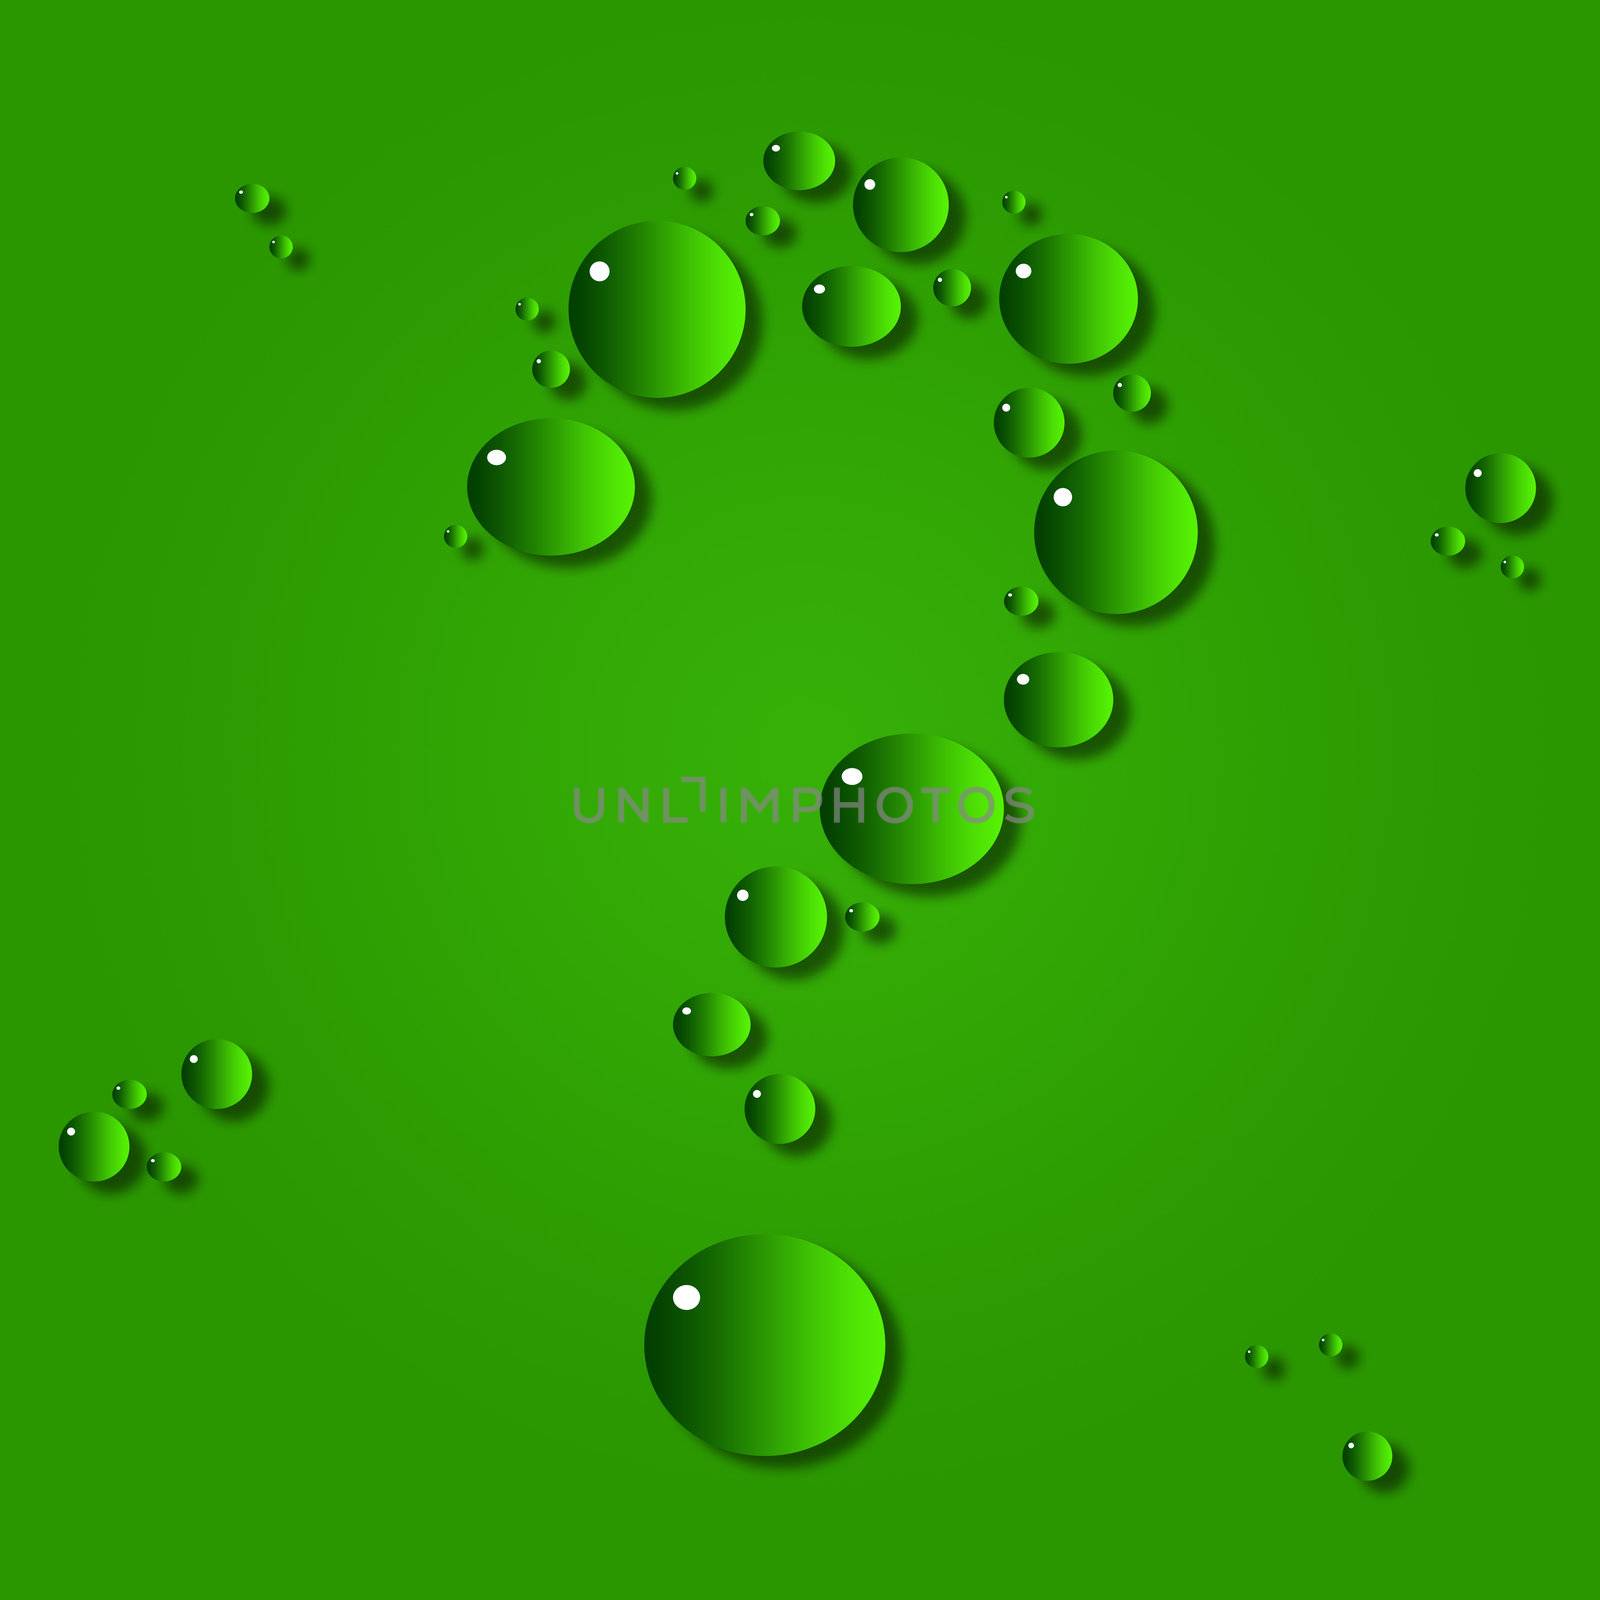 Water drops. The question-mark on a green background